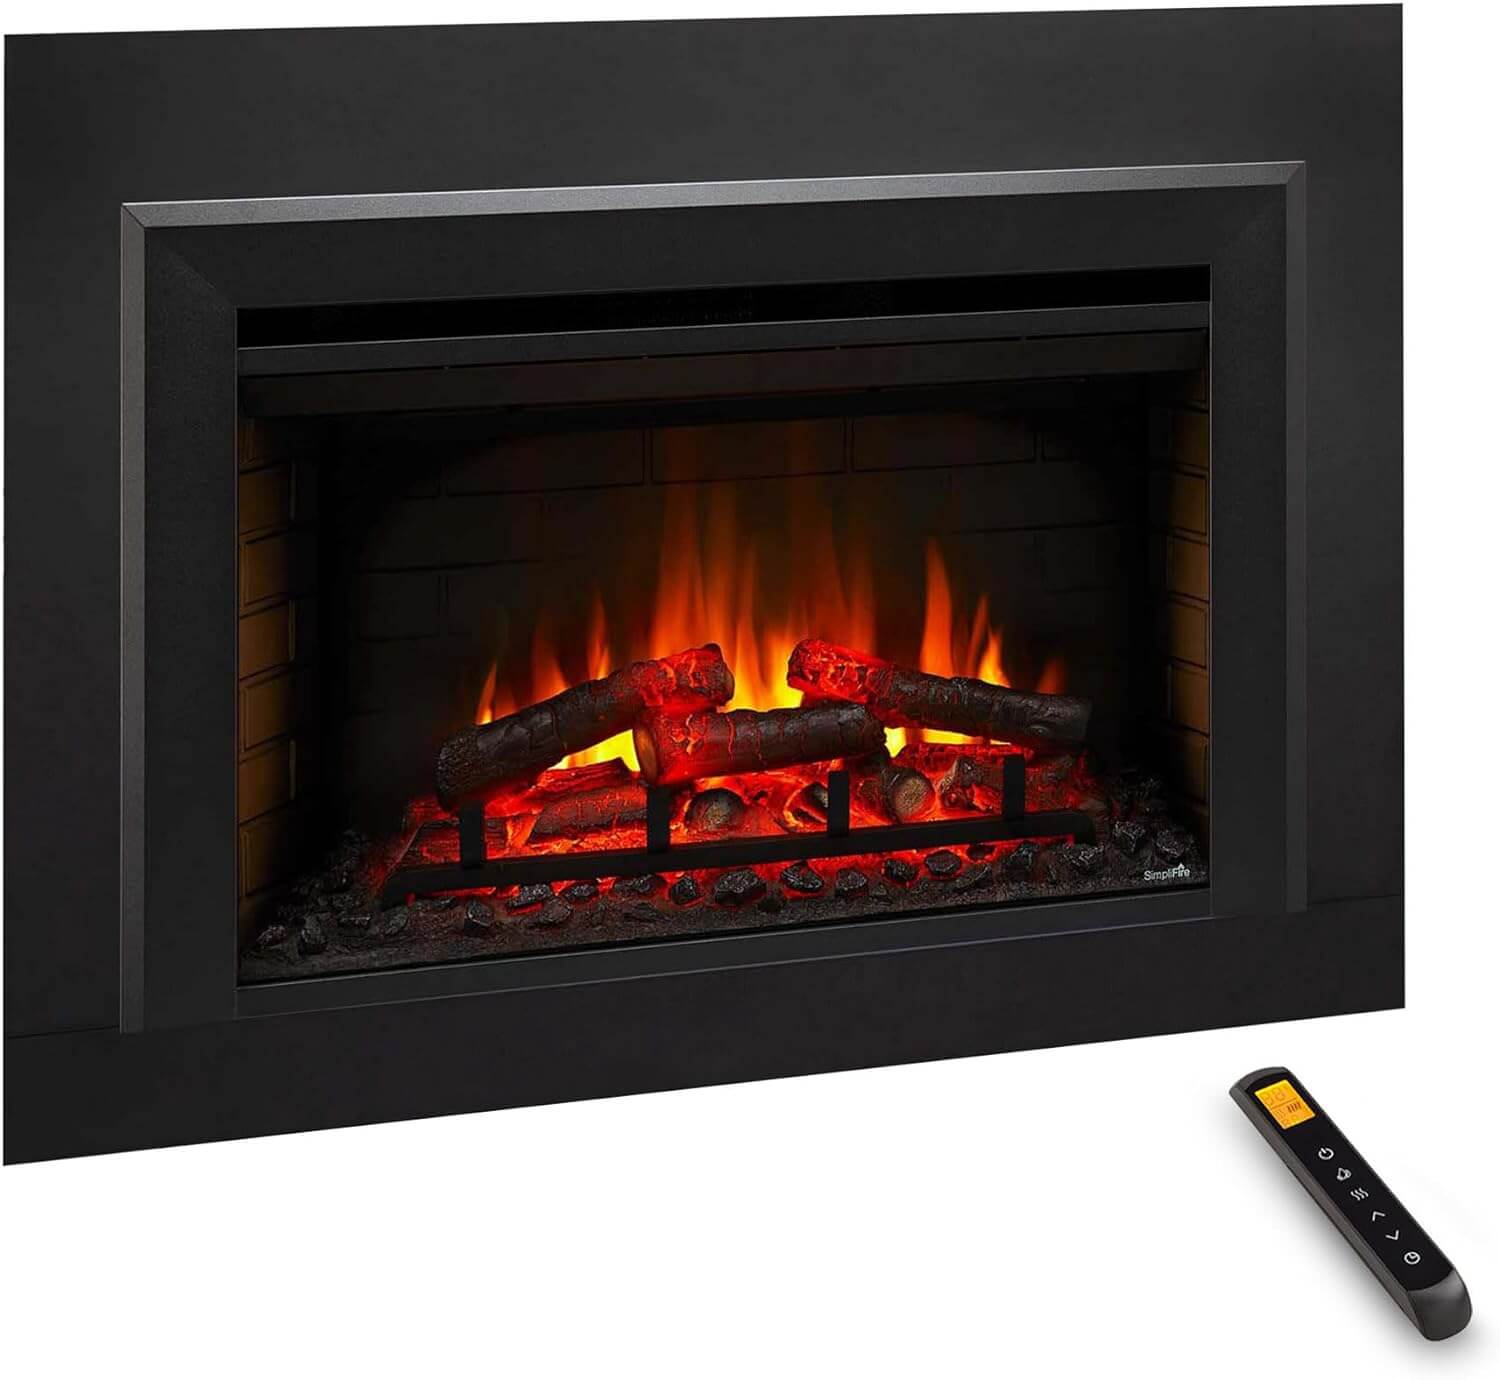 SimpliFire SF-INS30 30" Plug-In Electric Fireplace Insert